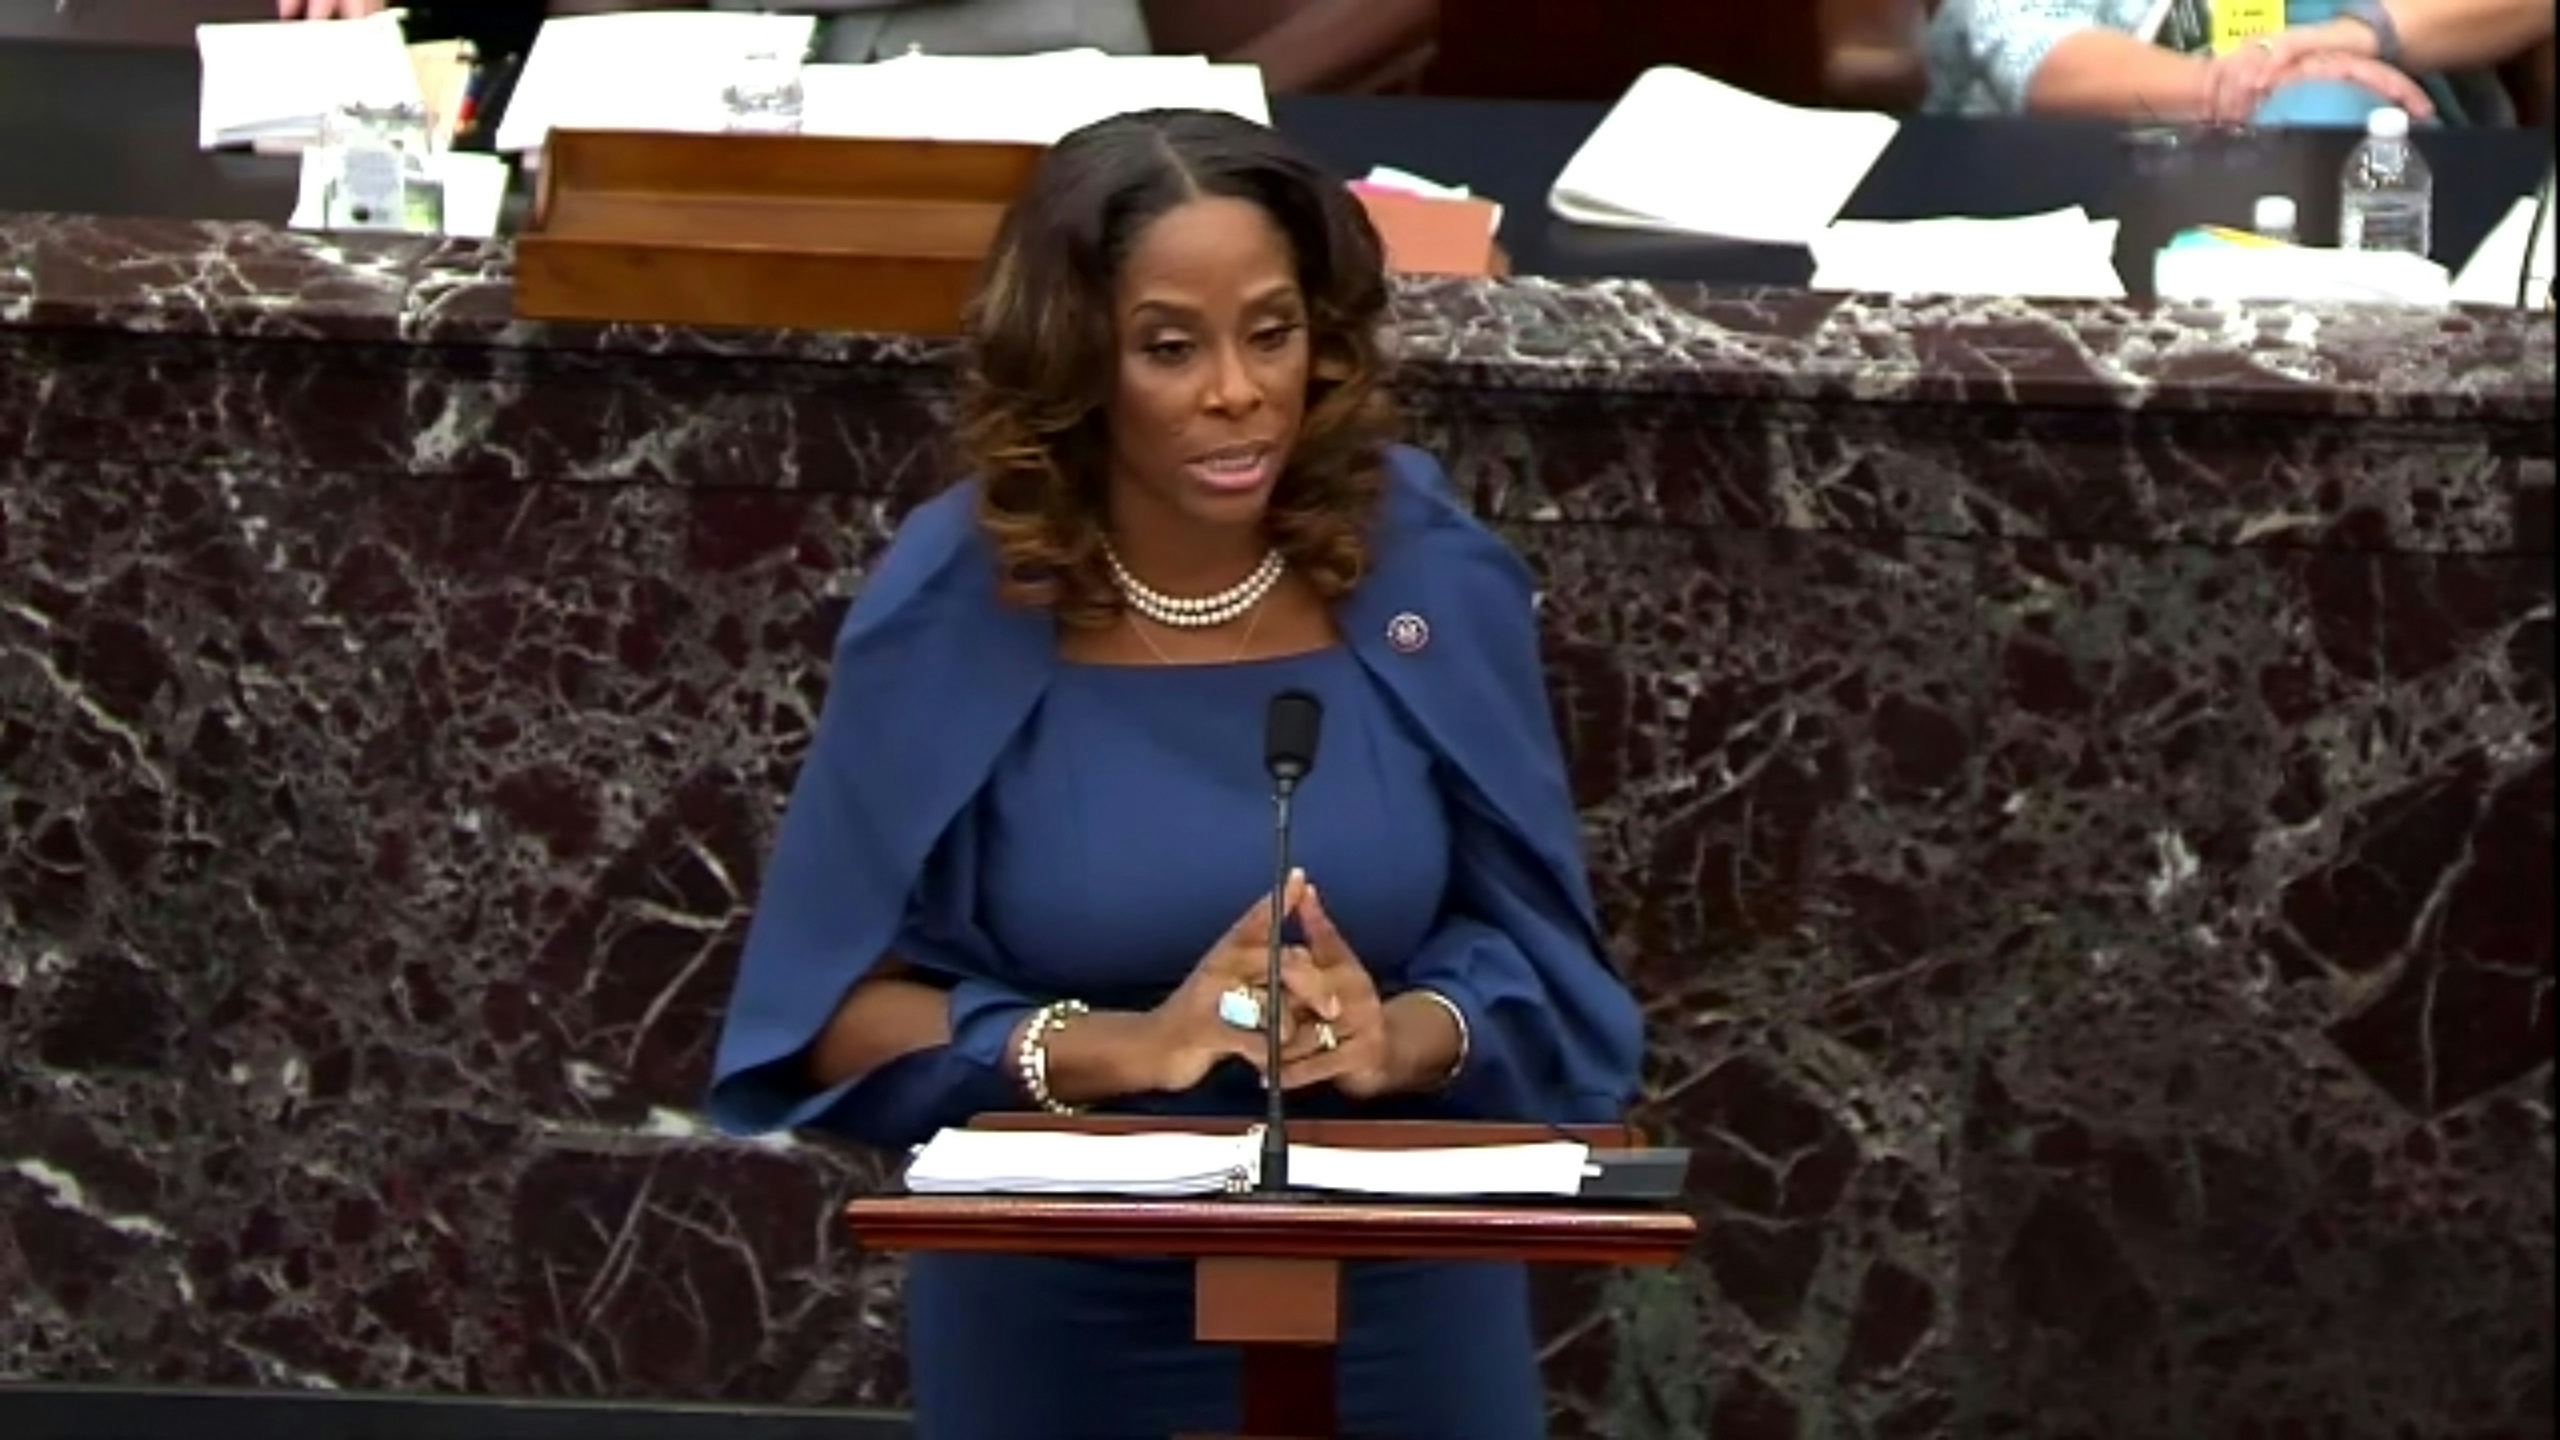 Del. Stacey Plaskett (D-Virgin Islands) speaks on the second day of former President Donald Trump's second impeachment trial at the U.S. Capitol on February 10, 2021 in Washington, DC.